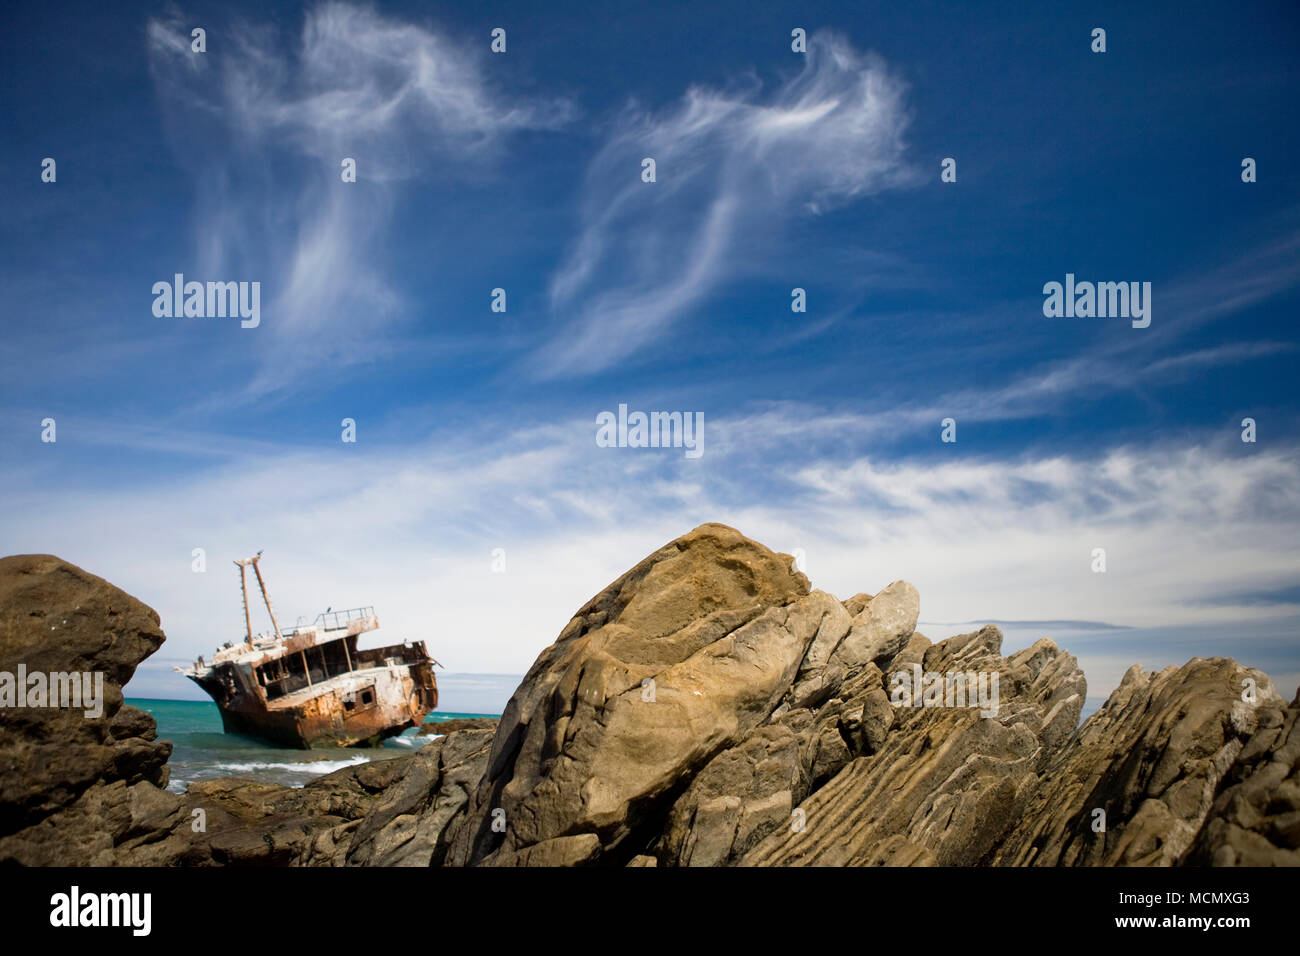 Shipwreck at Cape Agulhas, the most Southern Tip of the African continent Stock Photo